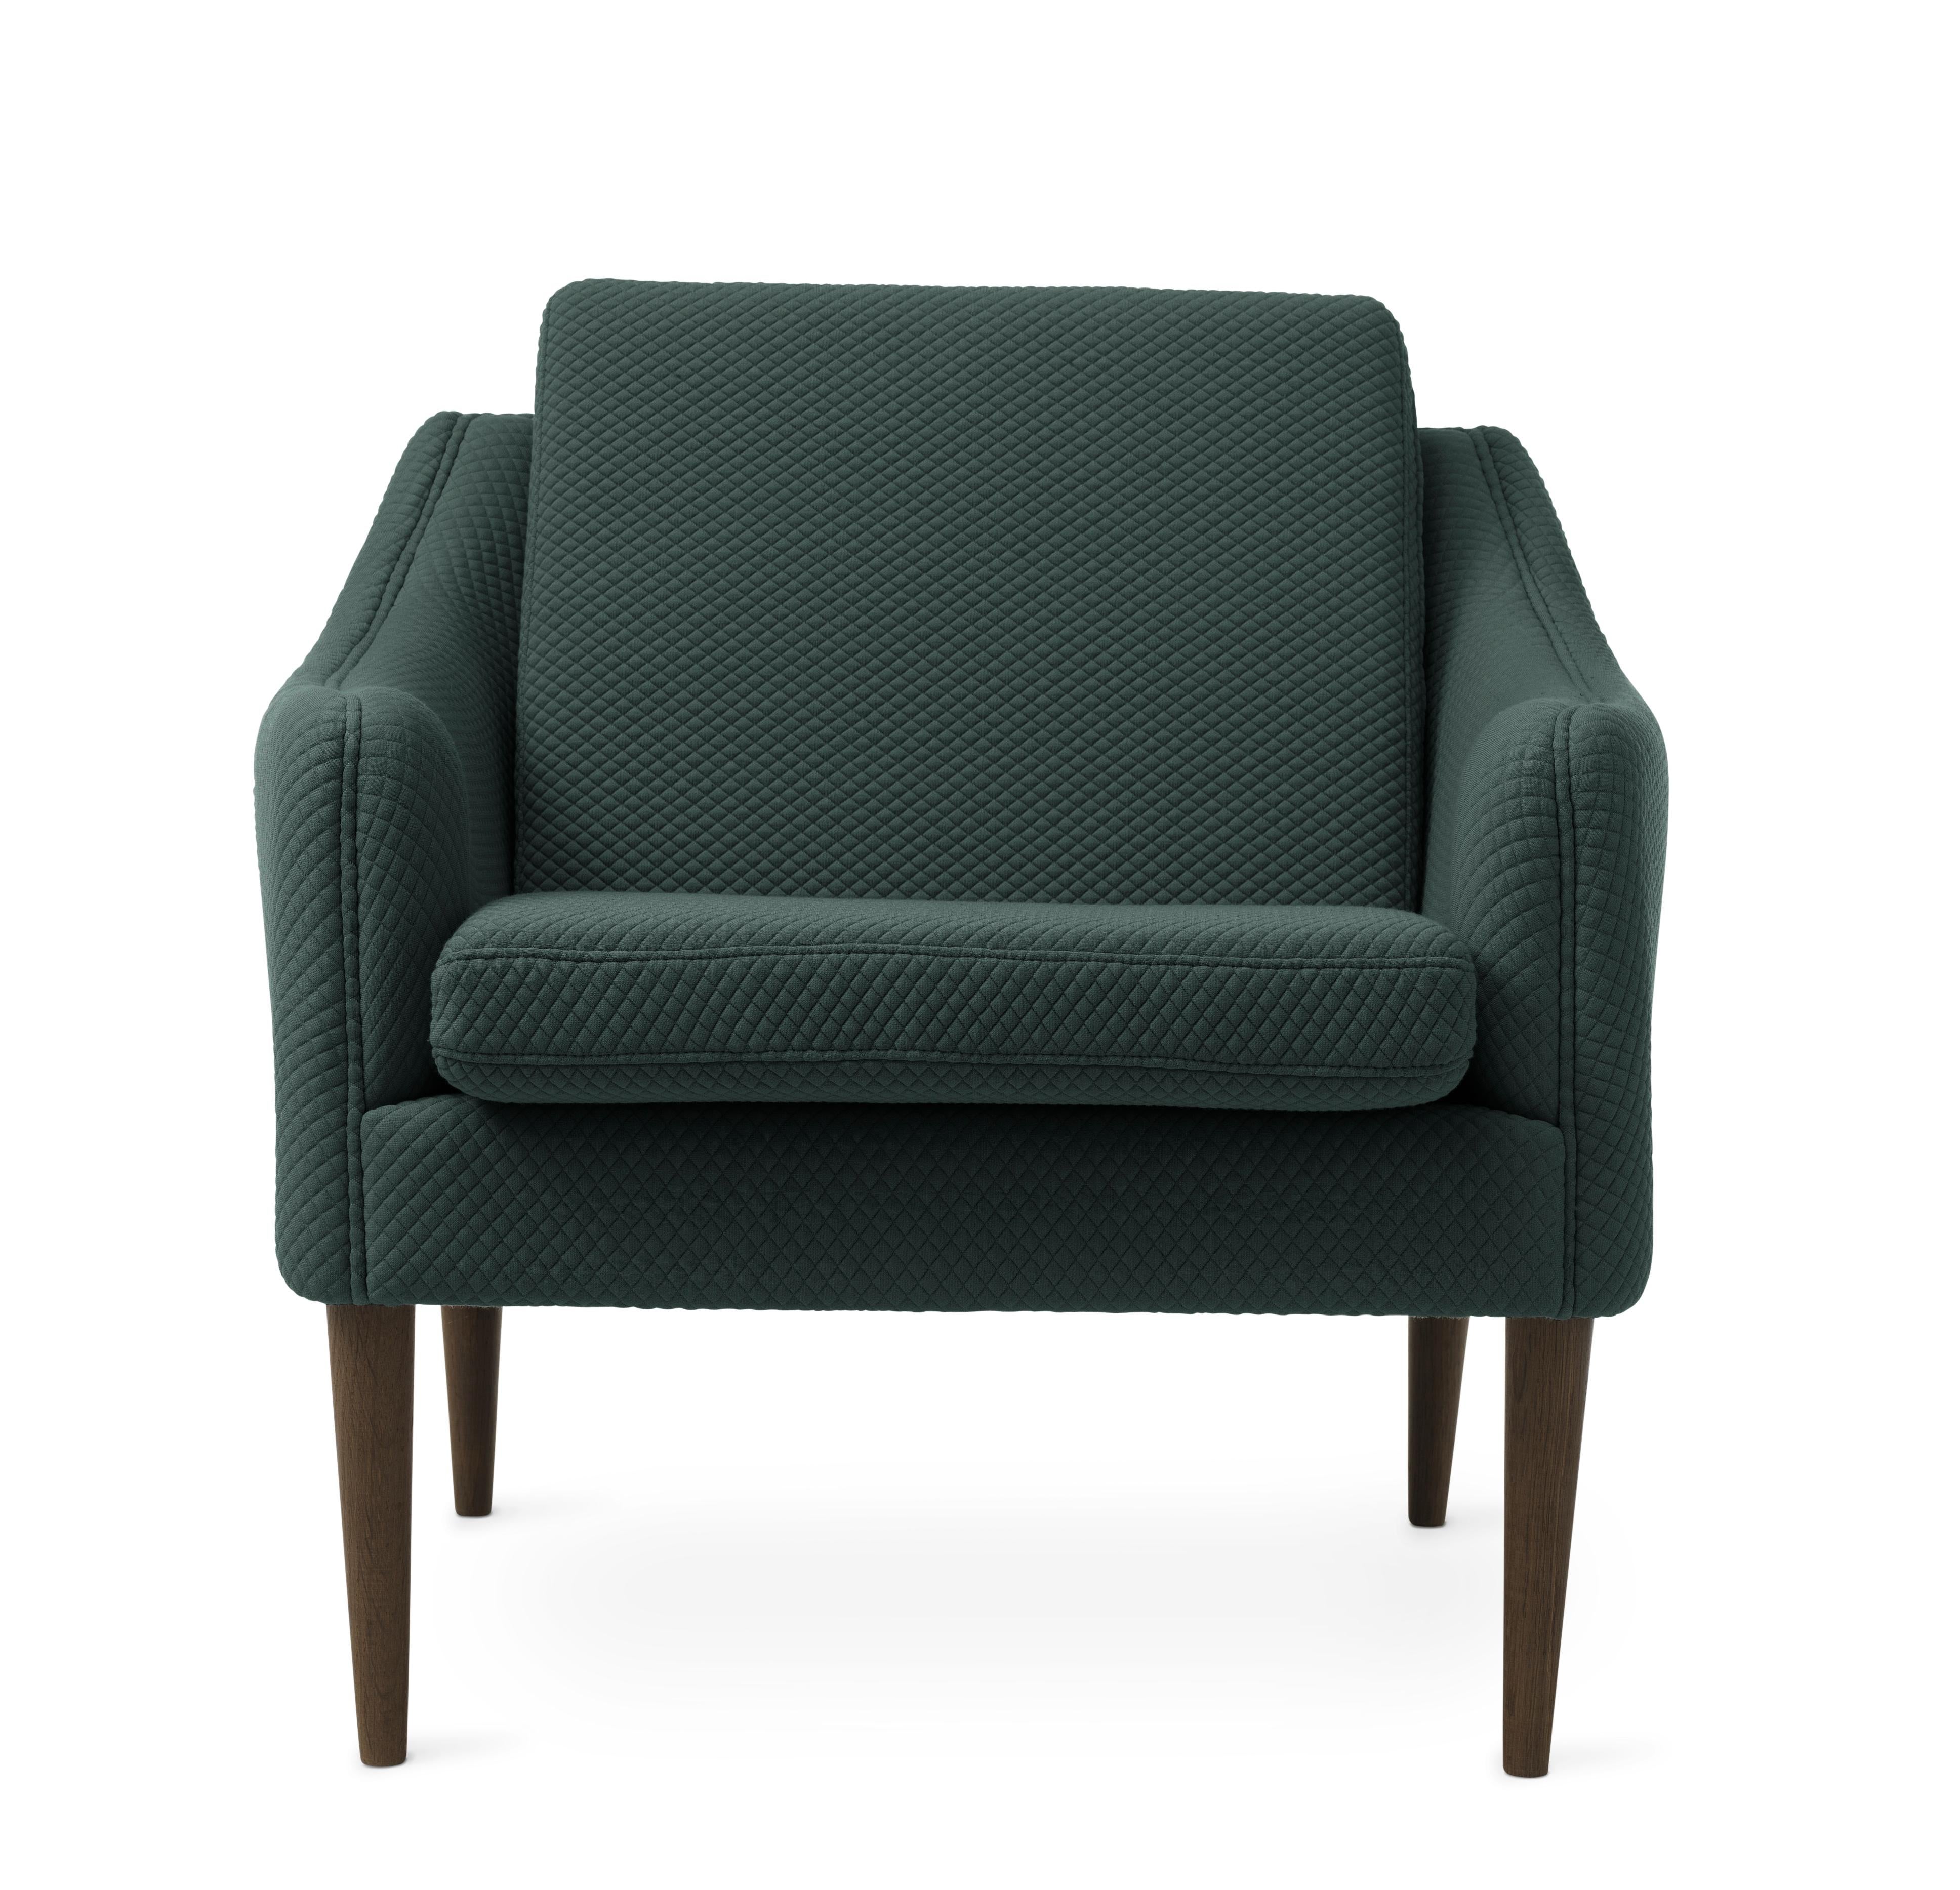 For Sale: Green (Mosaic 972) Mr. Olsen Lounge Chair with Smoked Oak Legs, by Hans Olsen from Warm Nordic